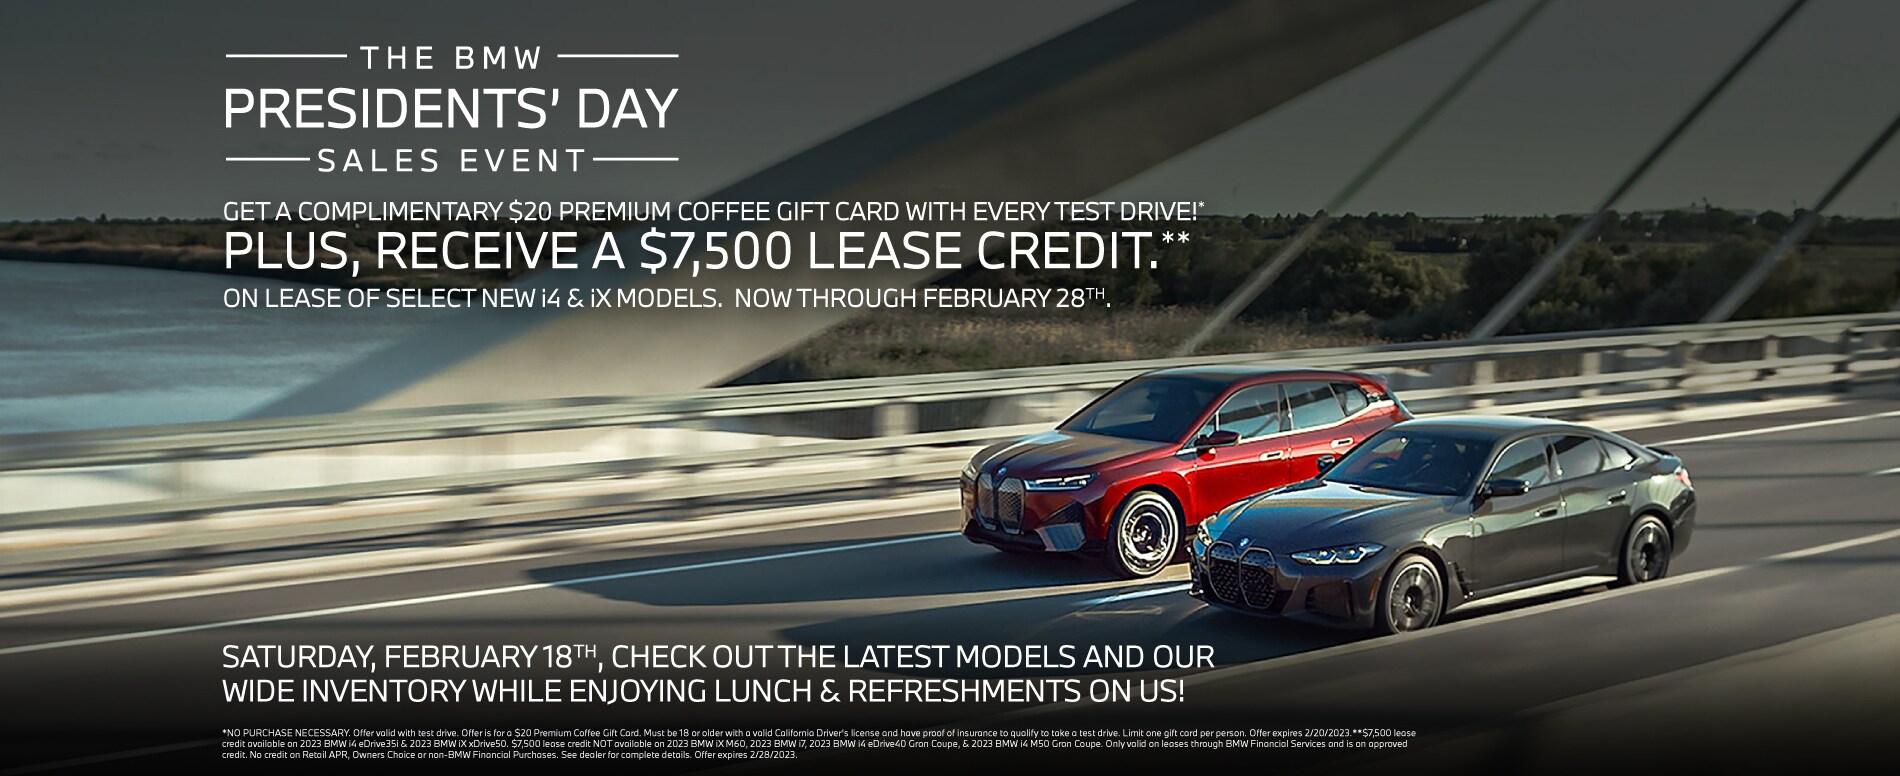 PRESIDENTS' DAY SALES EVENT BMW of Riverside